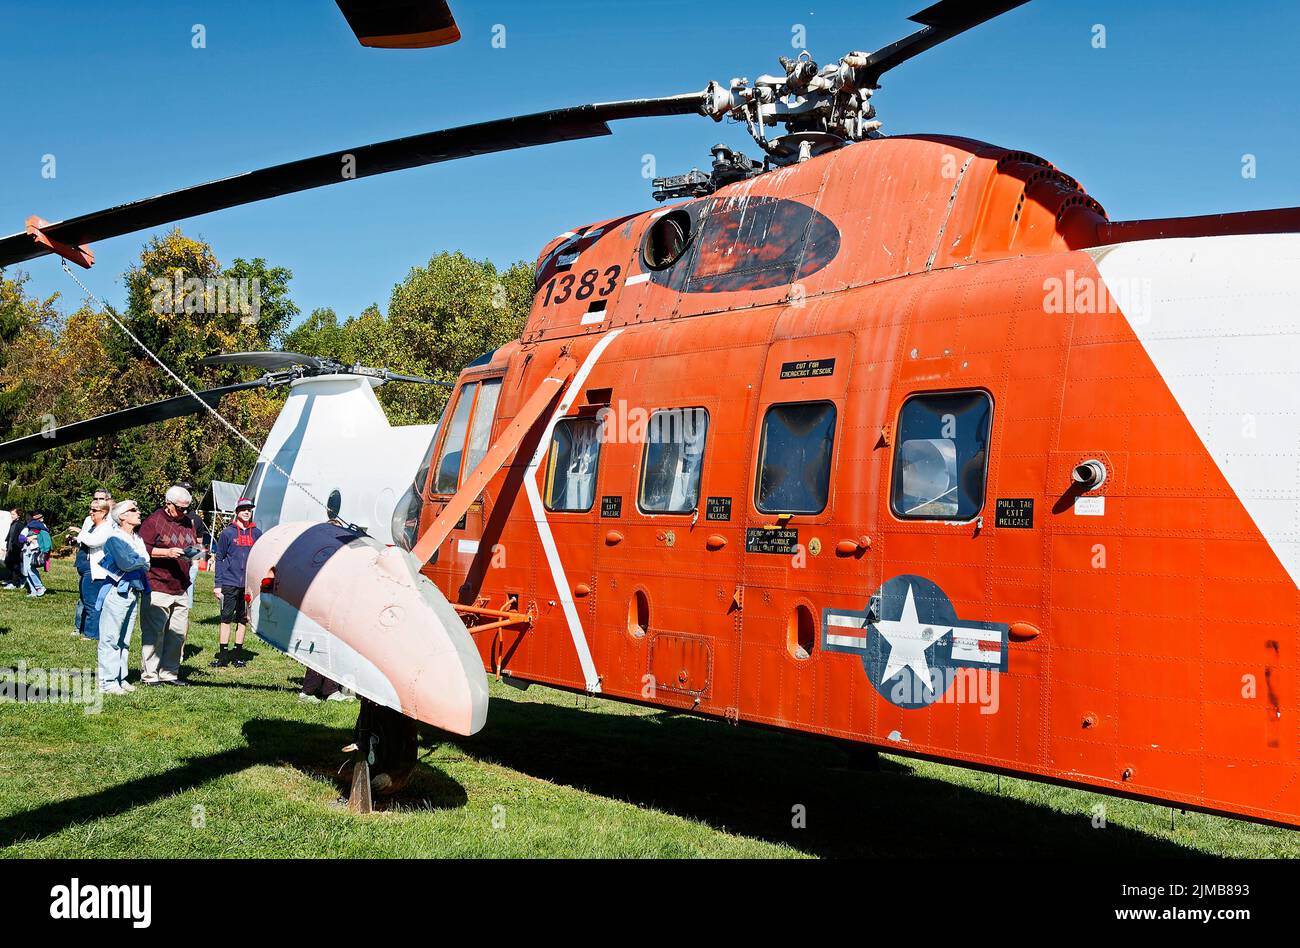 large helicopter, vintage, orange color, visitors looking, outdoors, aircraft, military, transportation, Helicopter Museum; Pennsylvania; West Chester Stock Photo